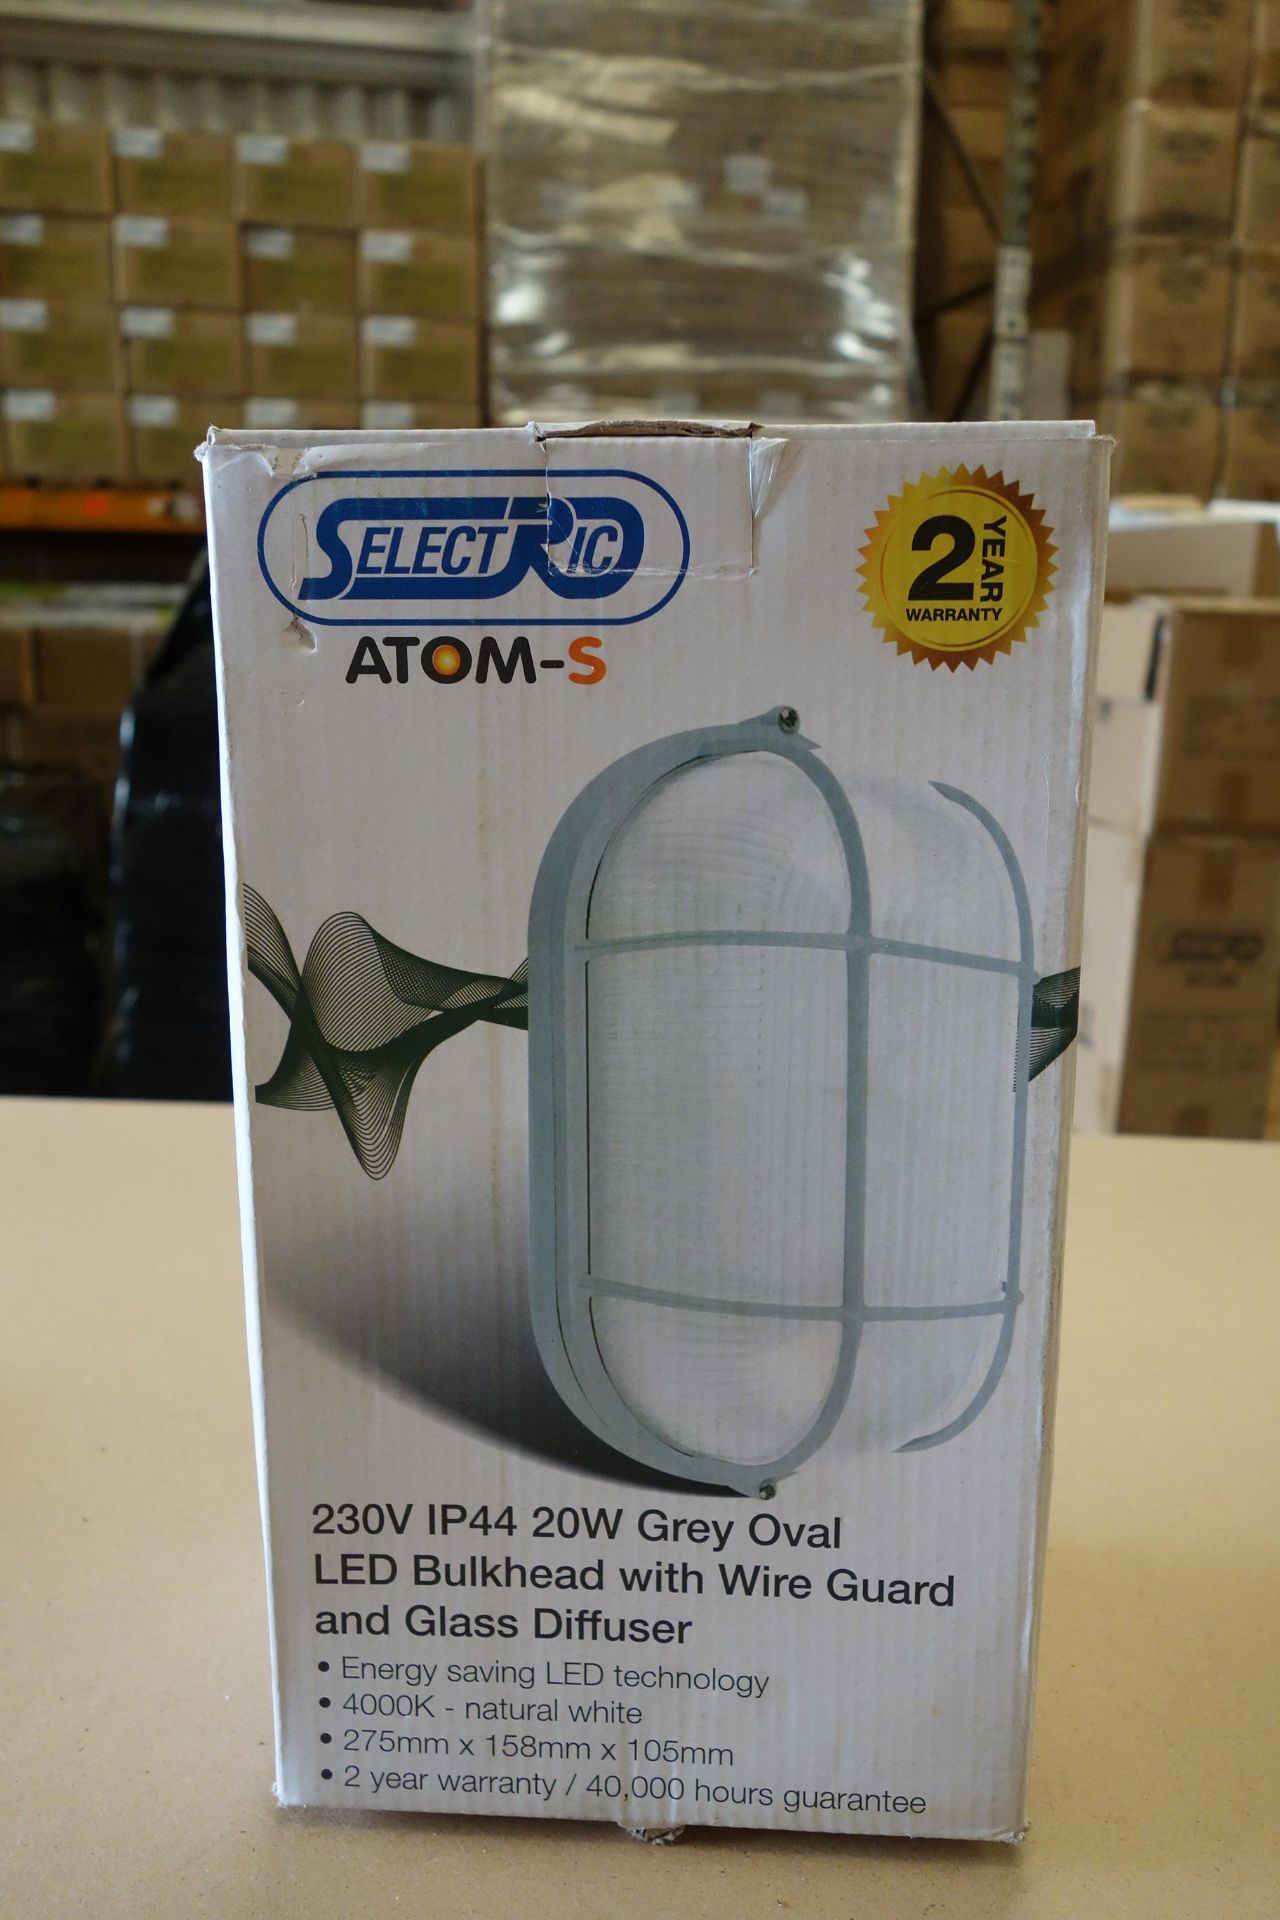 20 X Select ATOM-5-3 20W LED Grey Oval Bulkhead With Wire Guard + Glass Deffuser 275MM X 158MM X